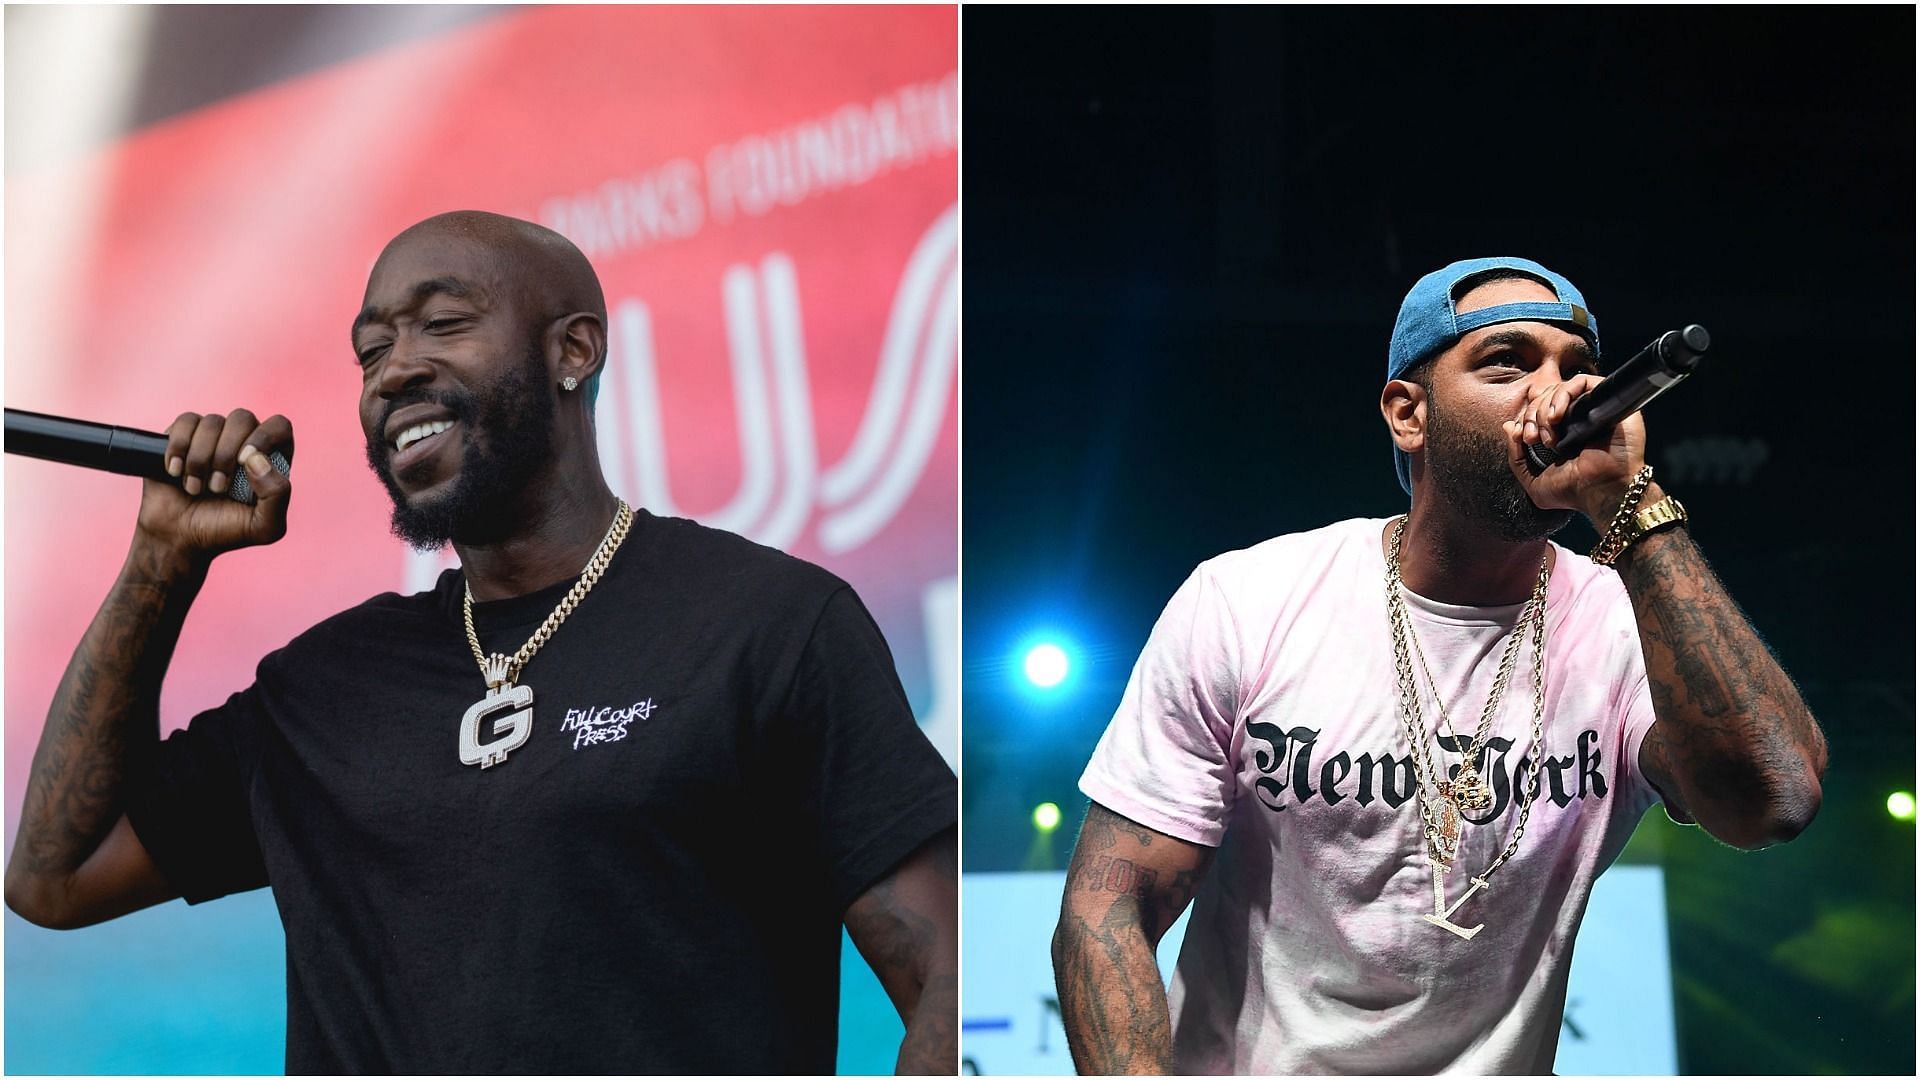 Freddie Gibbs and Jim Jones recently got into a fight with each other (Images by Rick Kern and Paras Griffin via Getty Images)